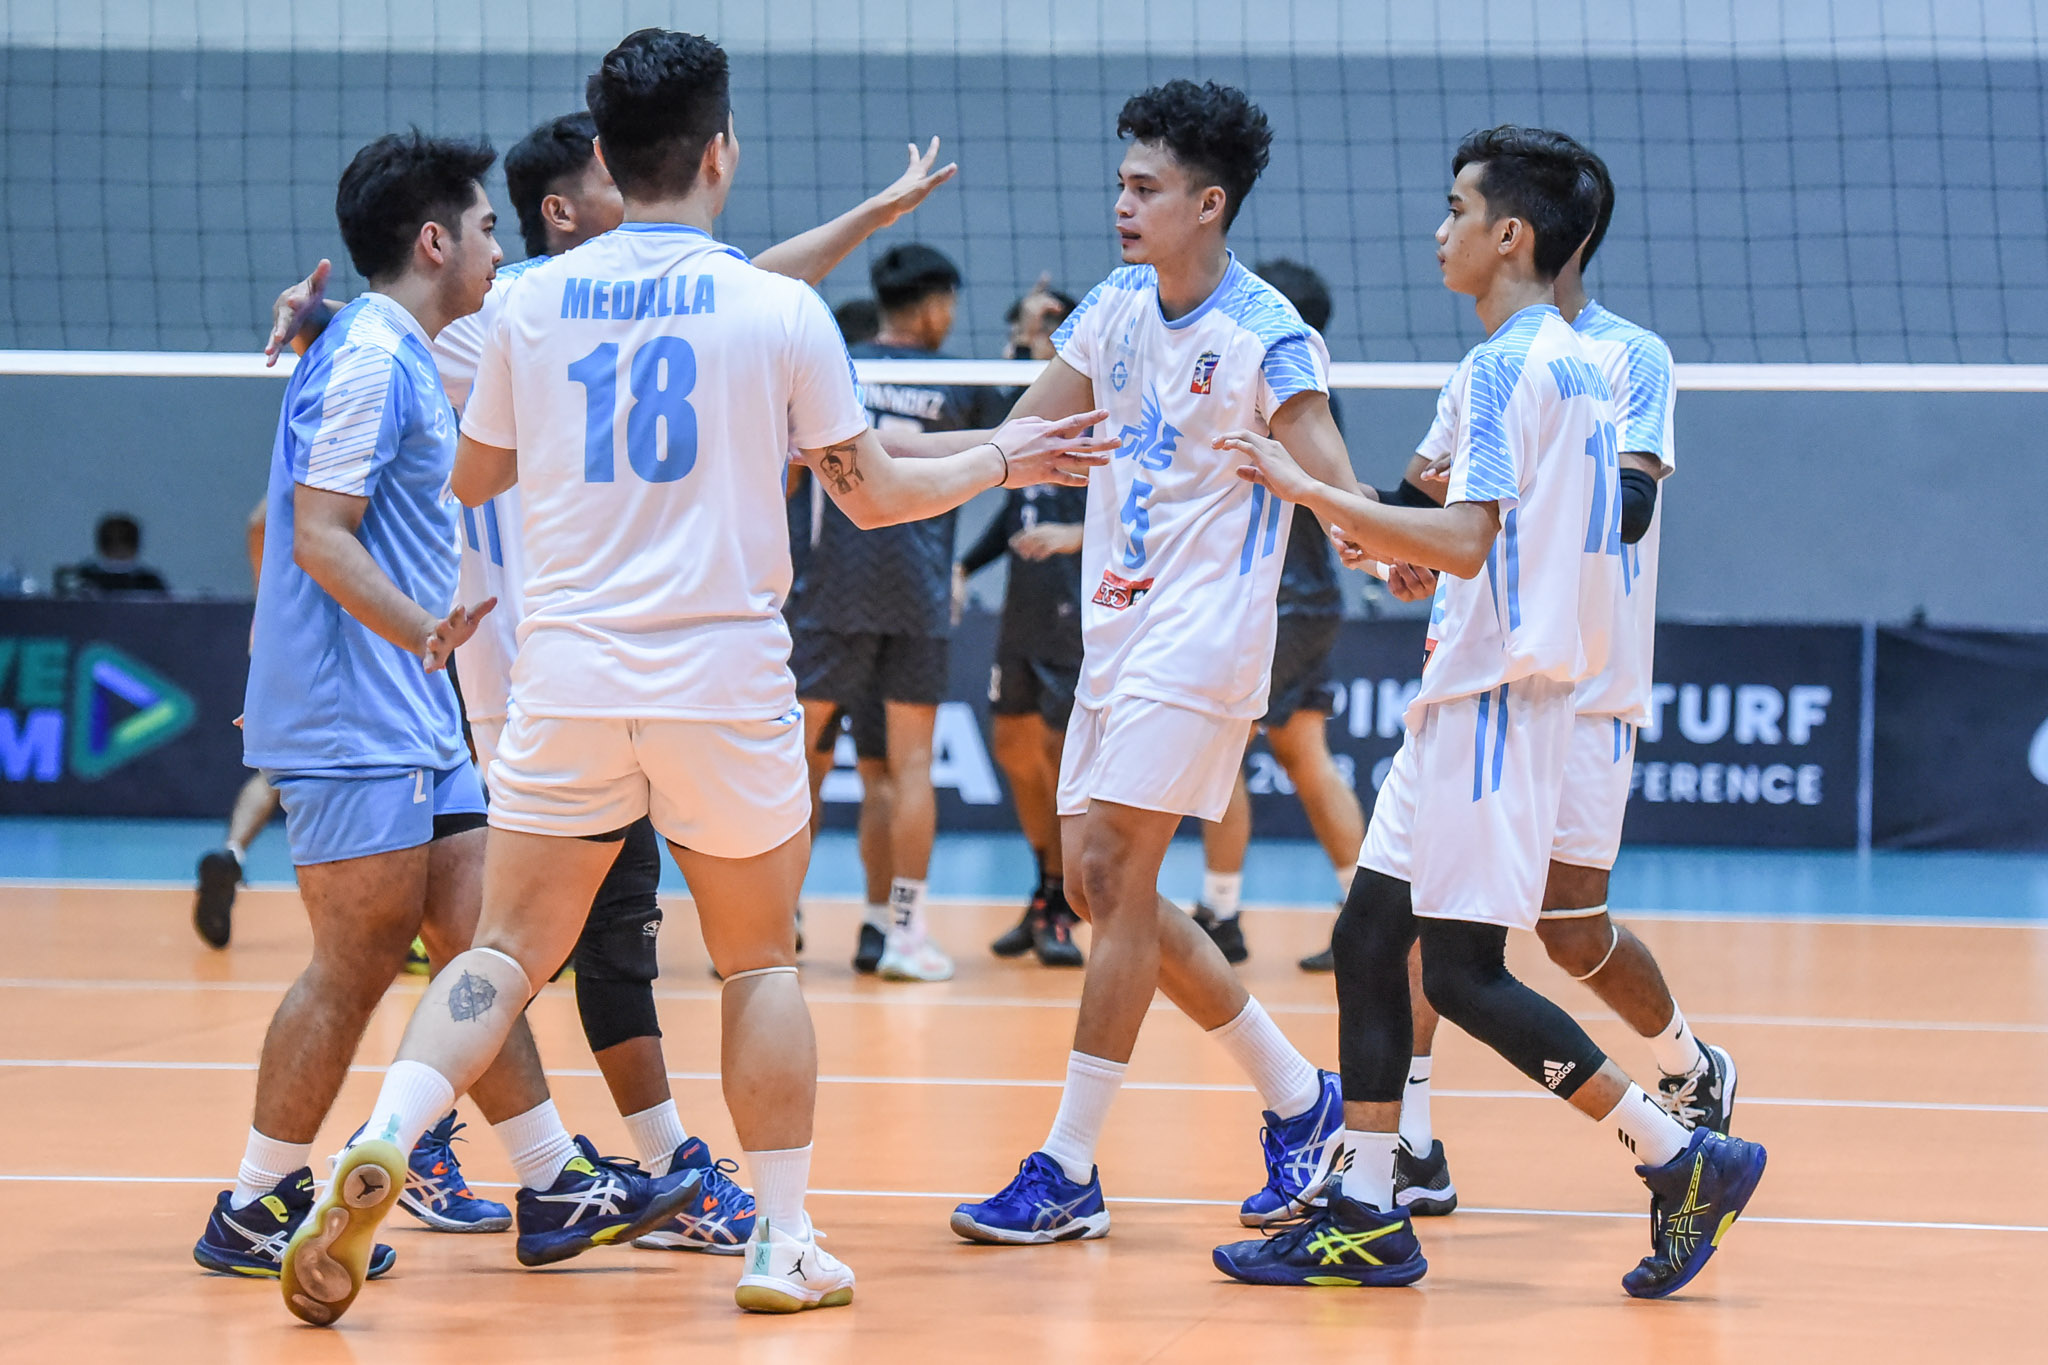 Spikers' Turf: VNS gets morale-boosting first win | Inquirer Sports